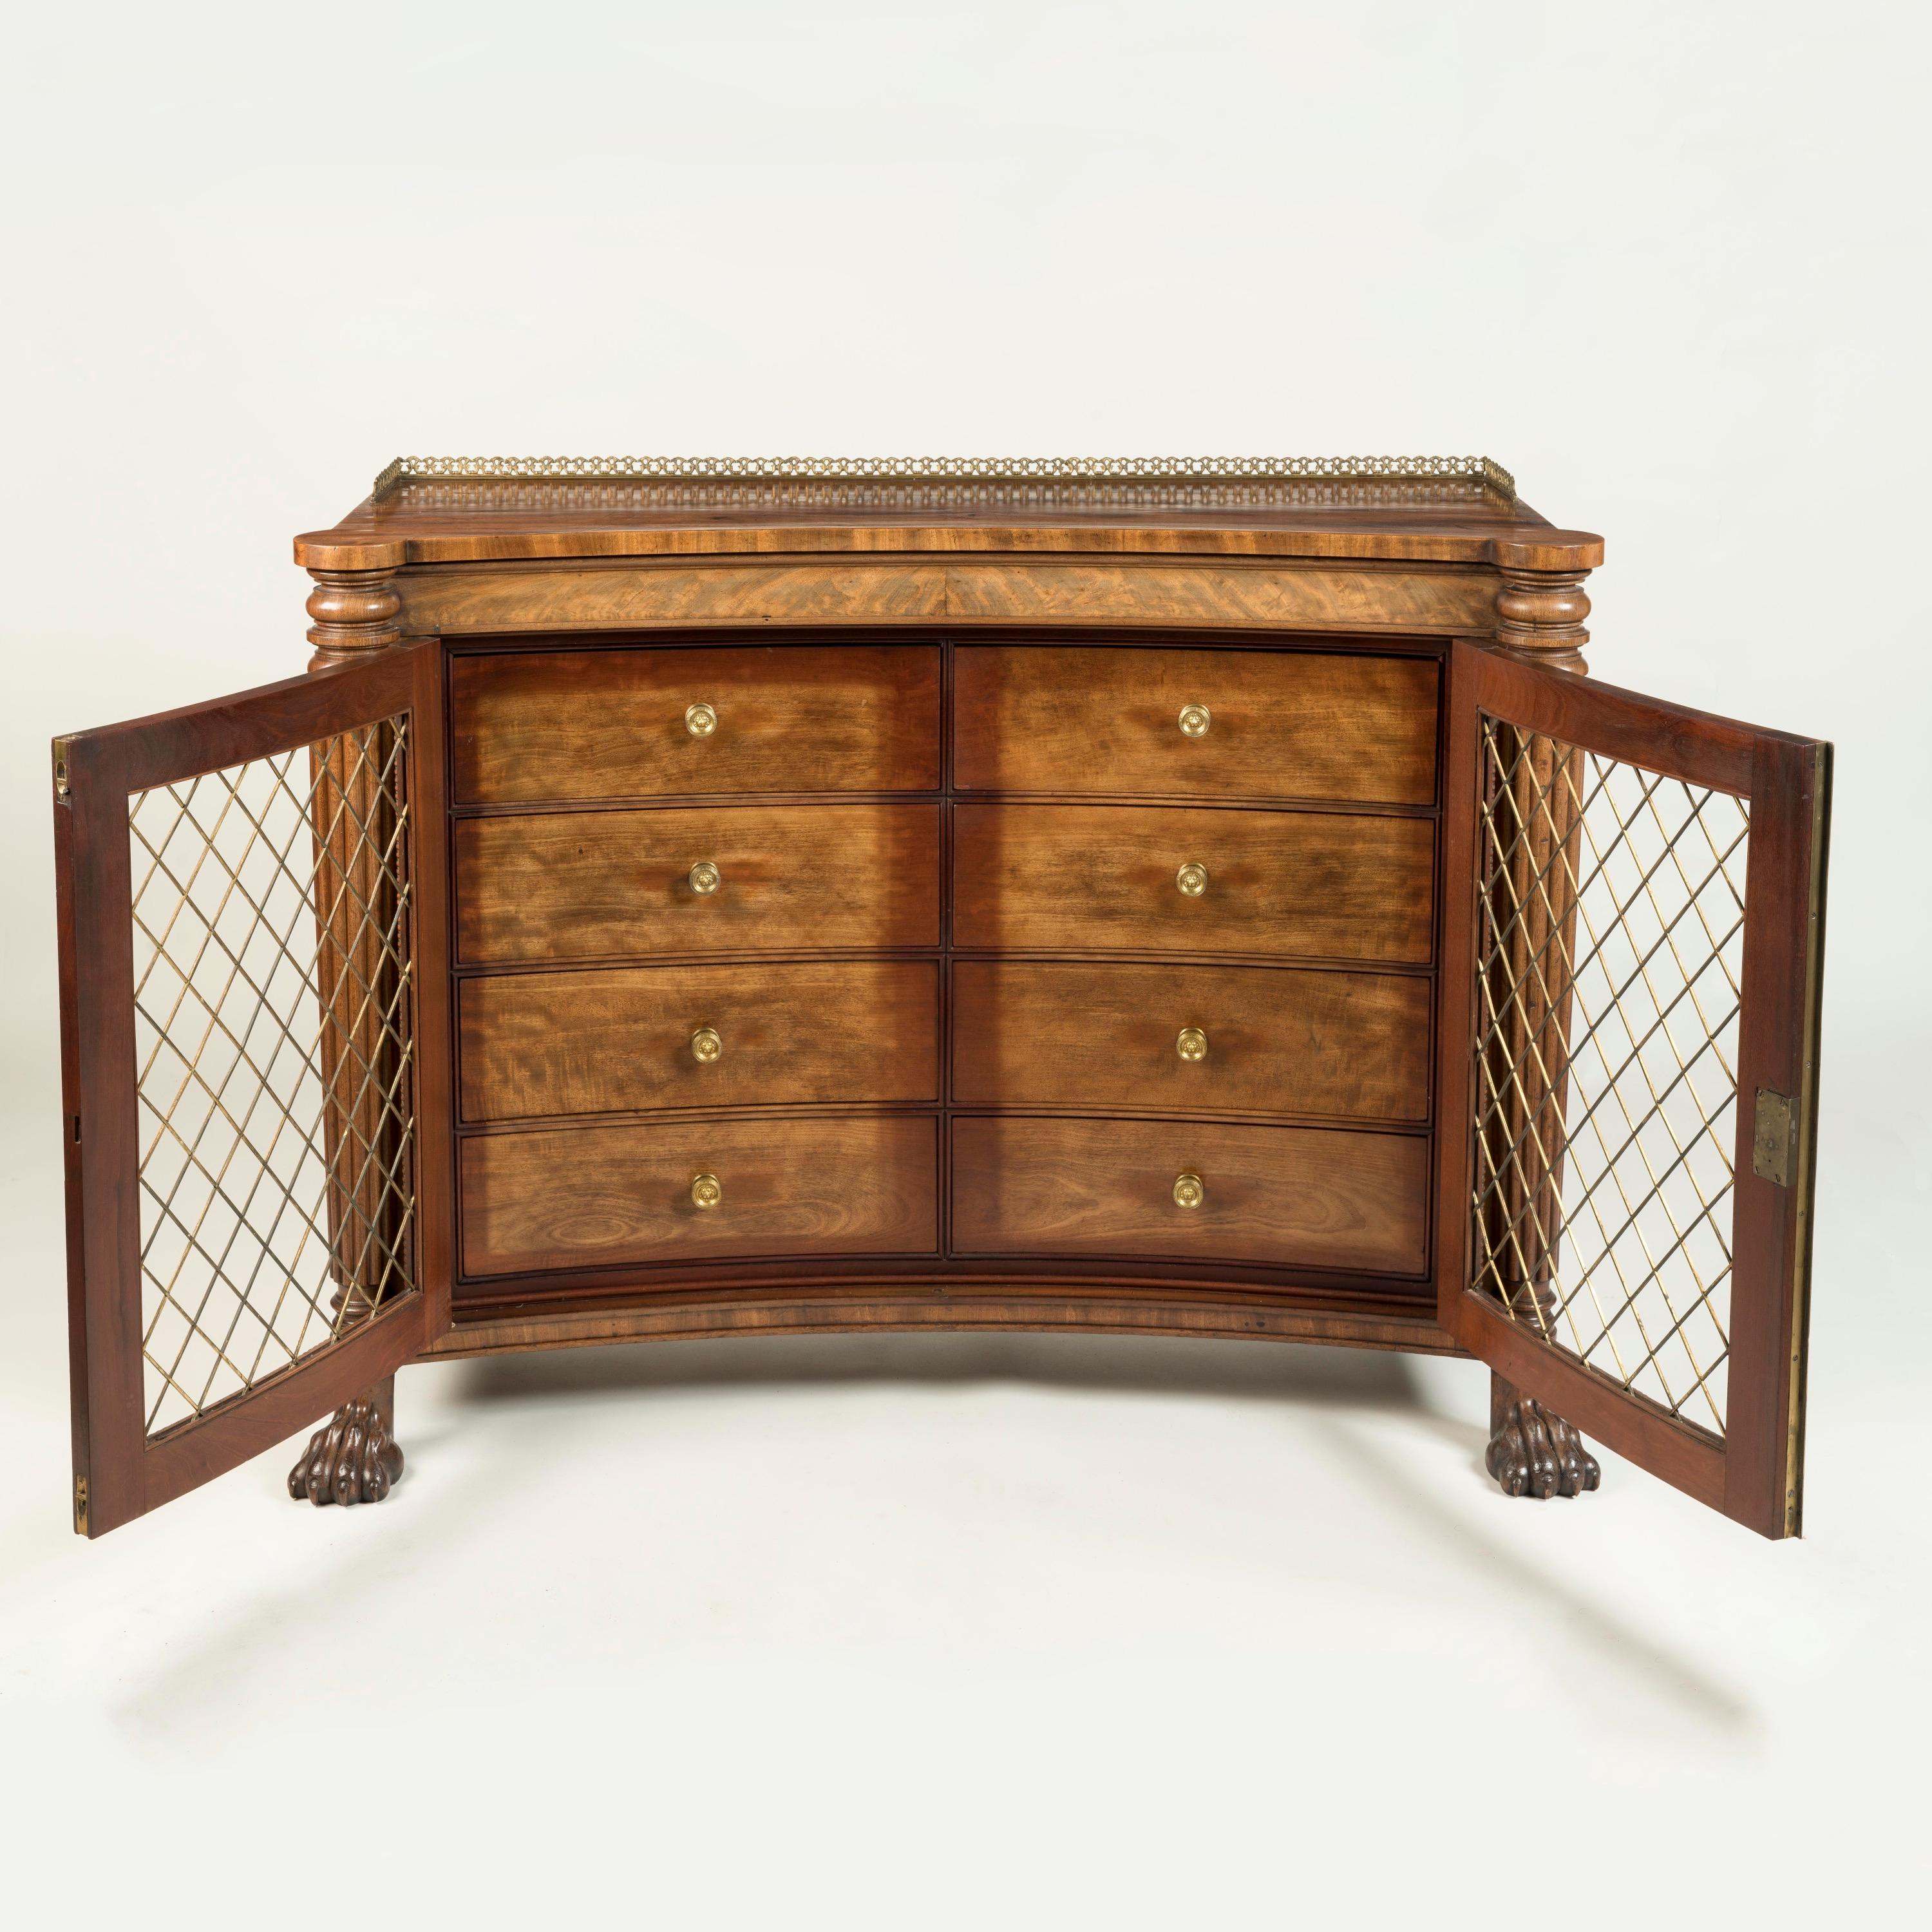 Rare 19th Century Regency Concave Side Cabinet of Mahogany with Brass Accents In Good Condition For Sale In London, GB